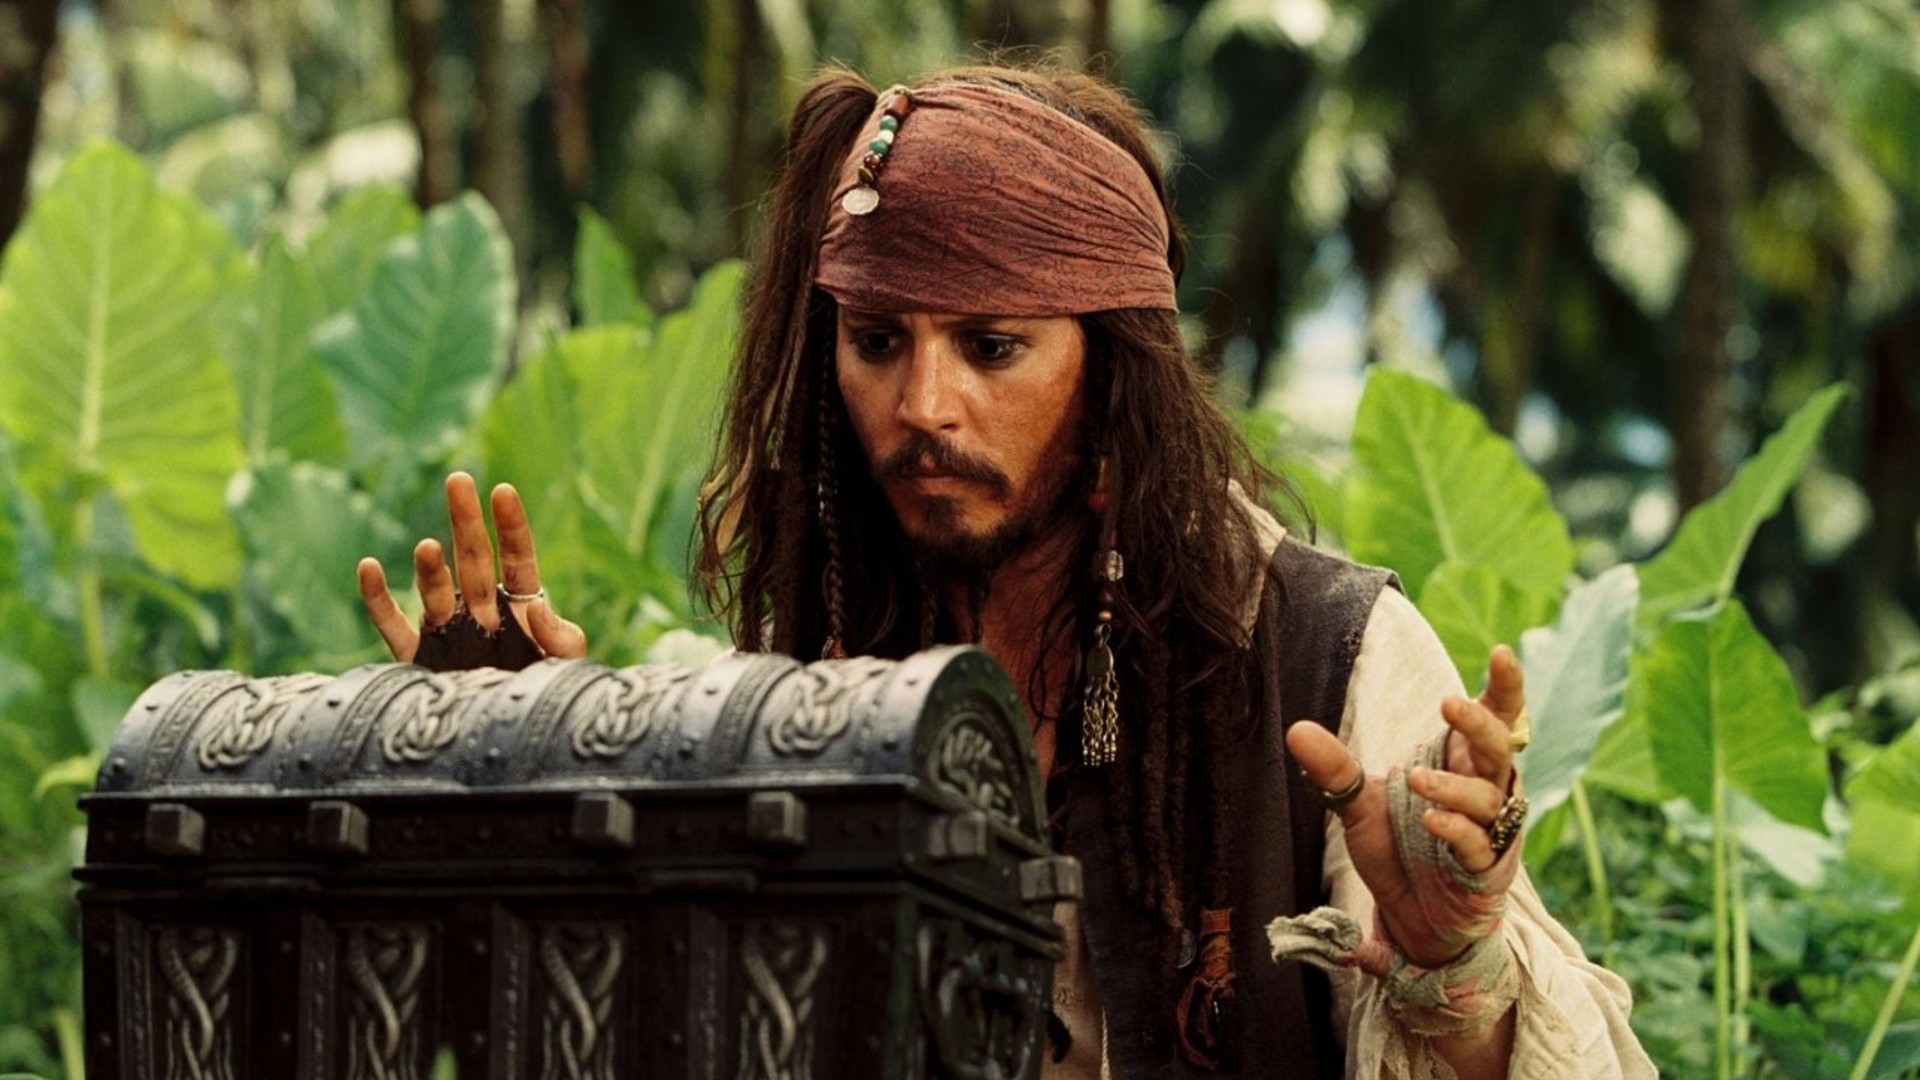 Johnny Depp reveals he had a “very good” Pirates of the Caribbean ending mapped out